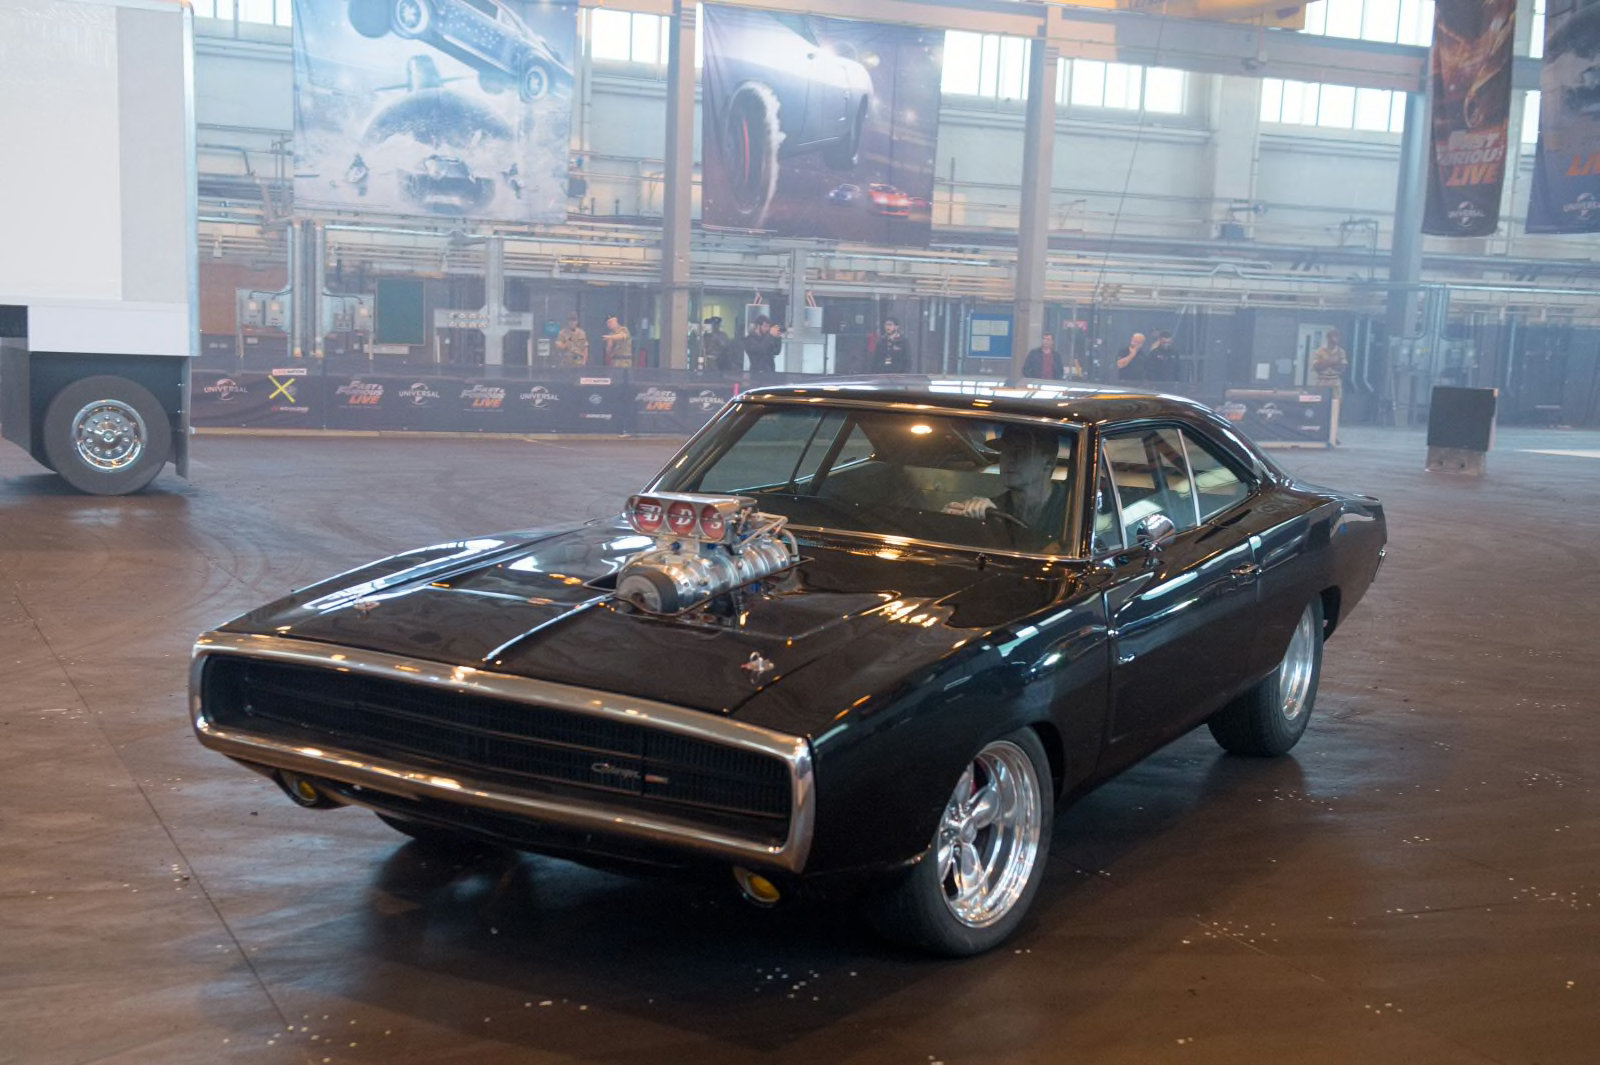 Some Iconic Dodge Chargers From TV and Hollywood - Art of Gears - Page 4